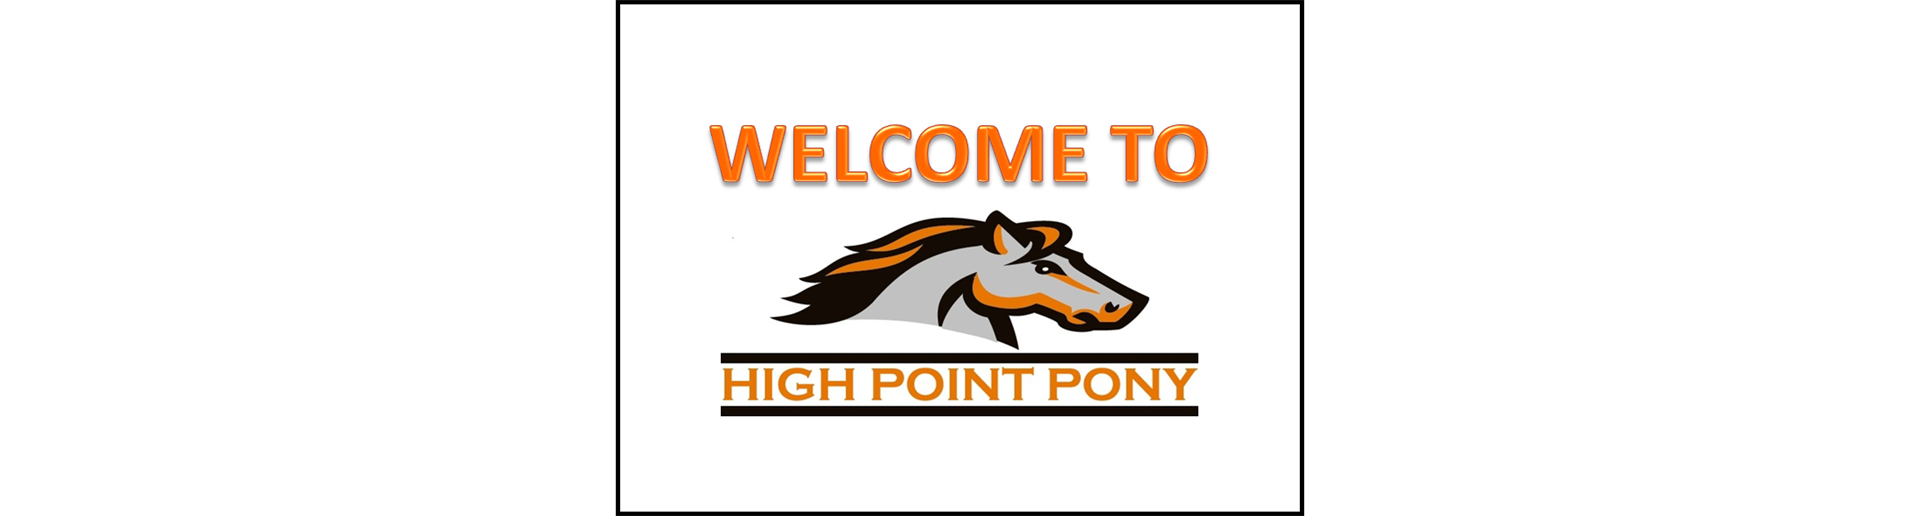 Welcome to High Point Pony